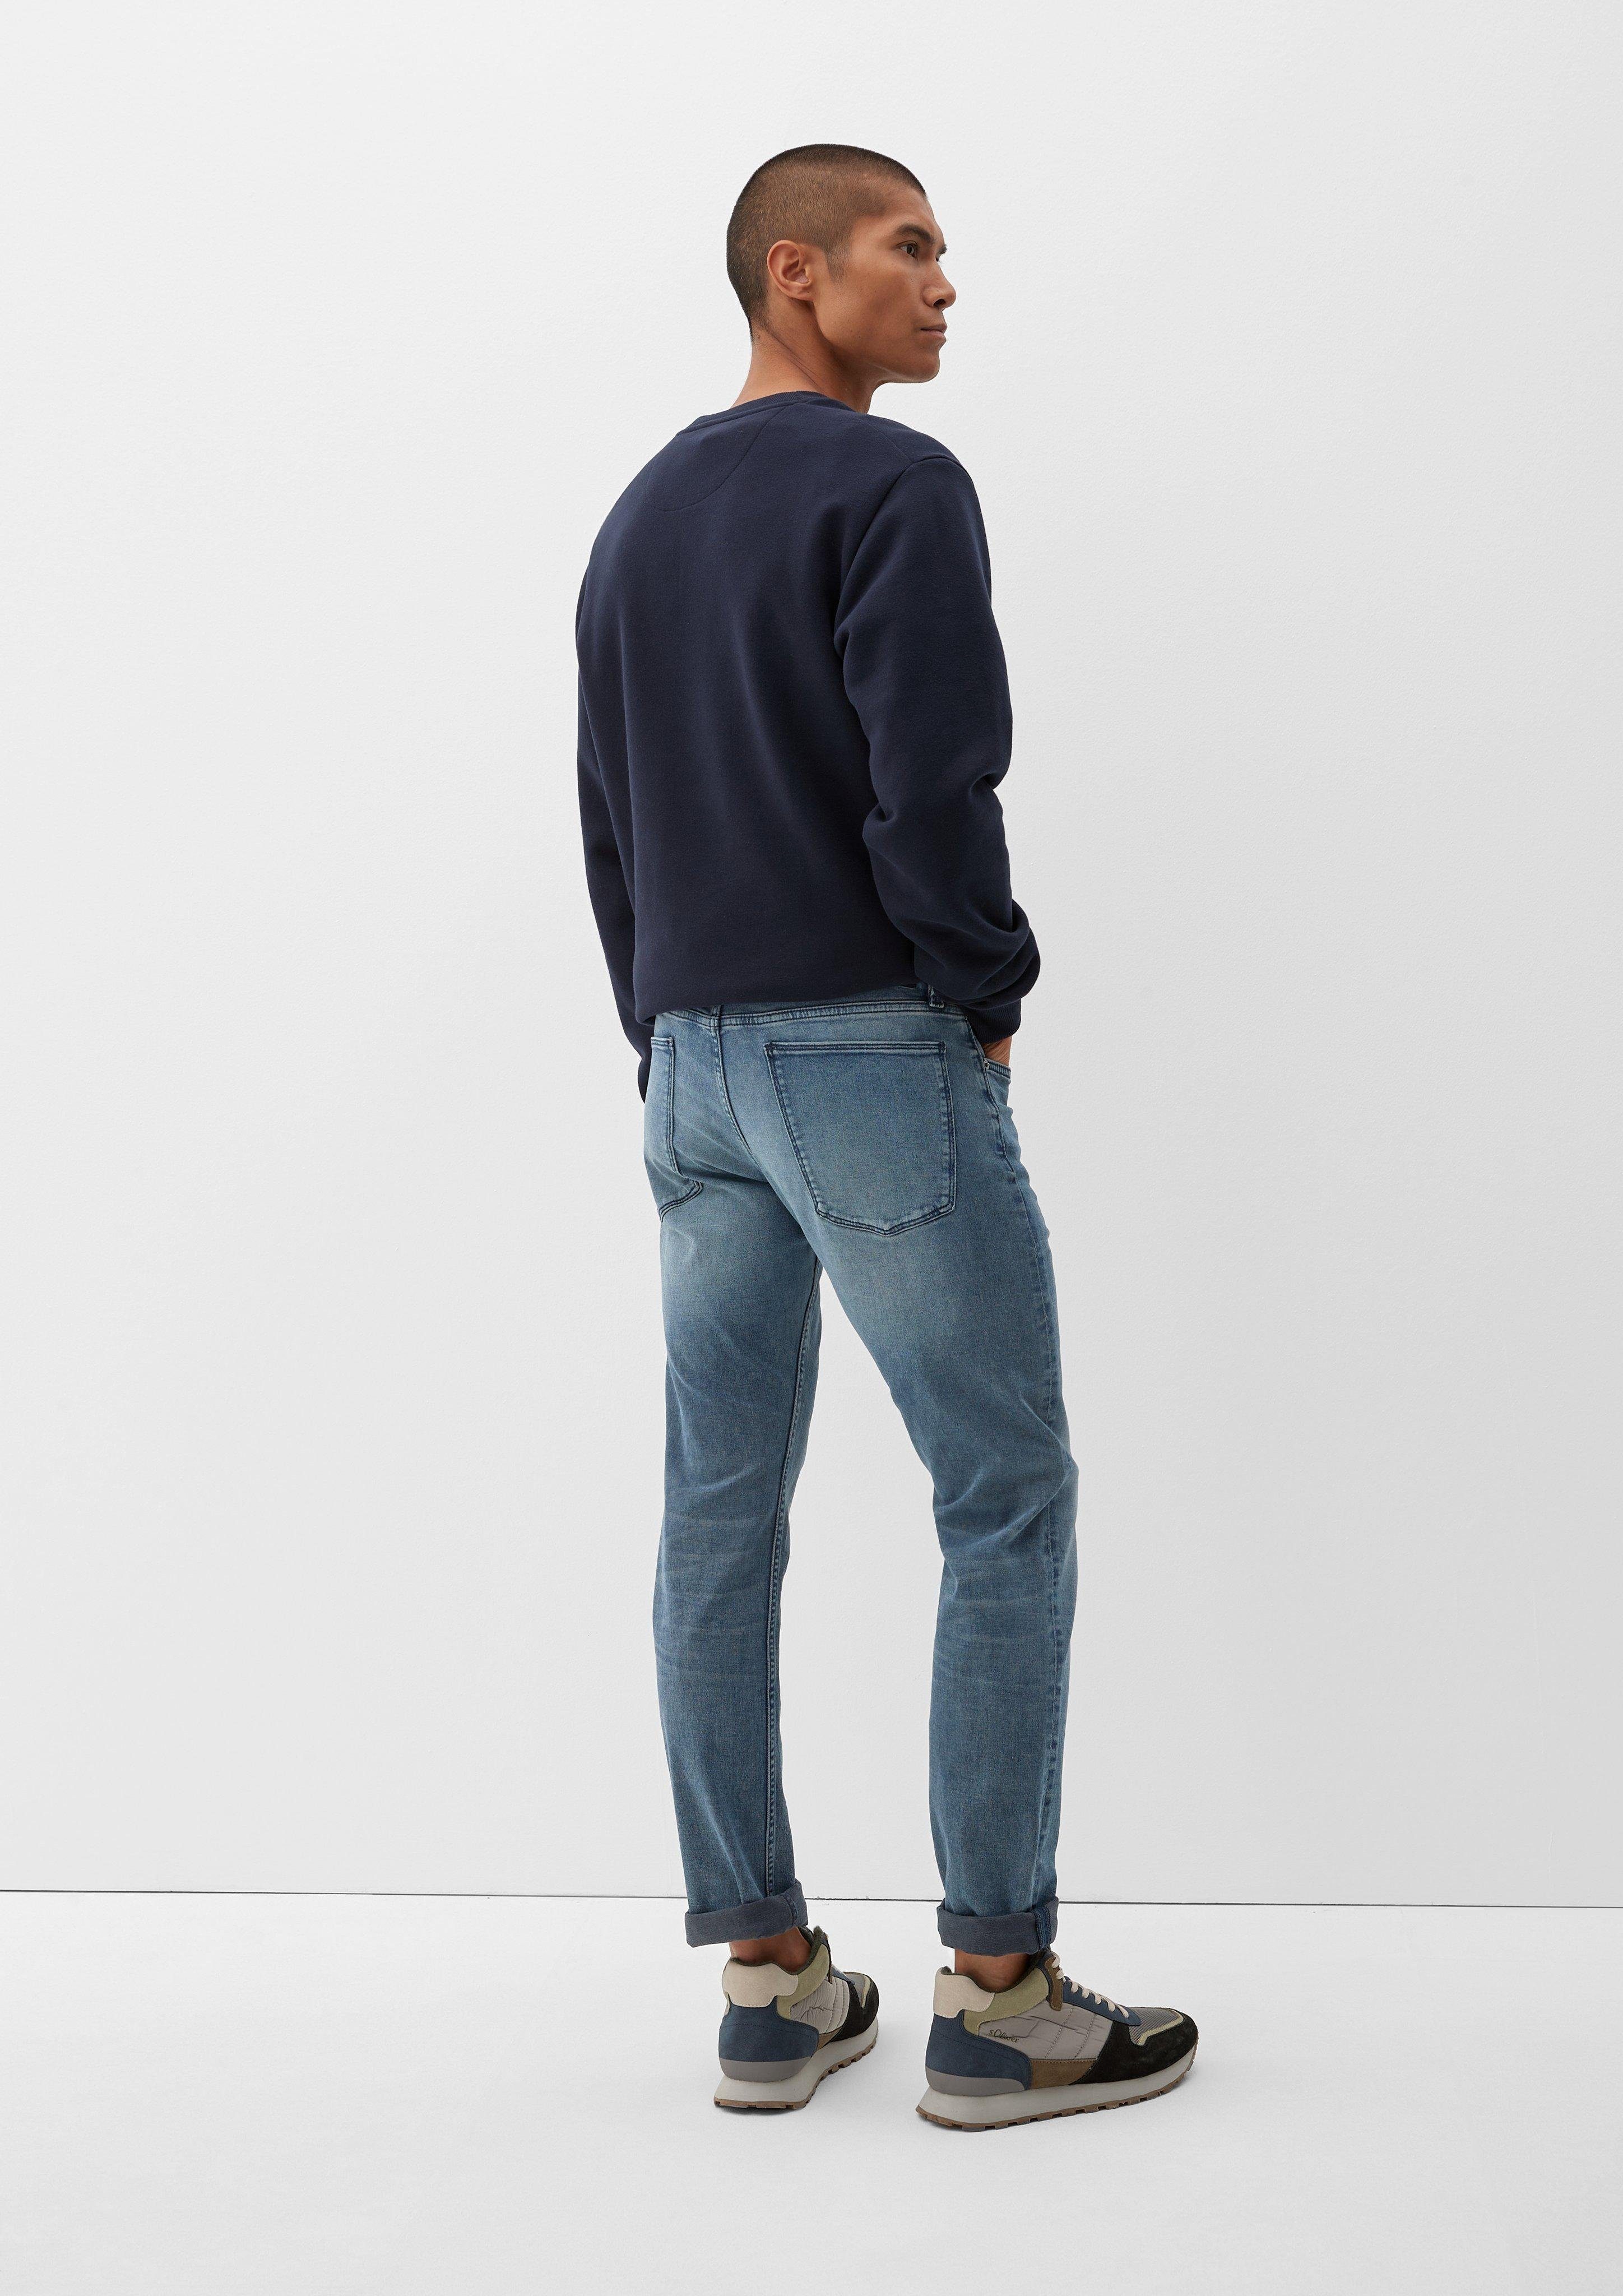 / Rise Jeans Leder-Patch s.Oliver Leg Waschung, / Fit Slim Carson / Tapered Mid Stoffhose